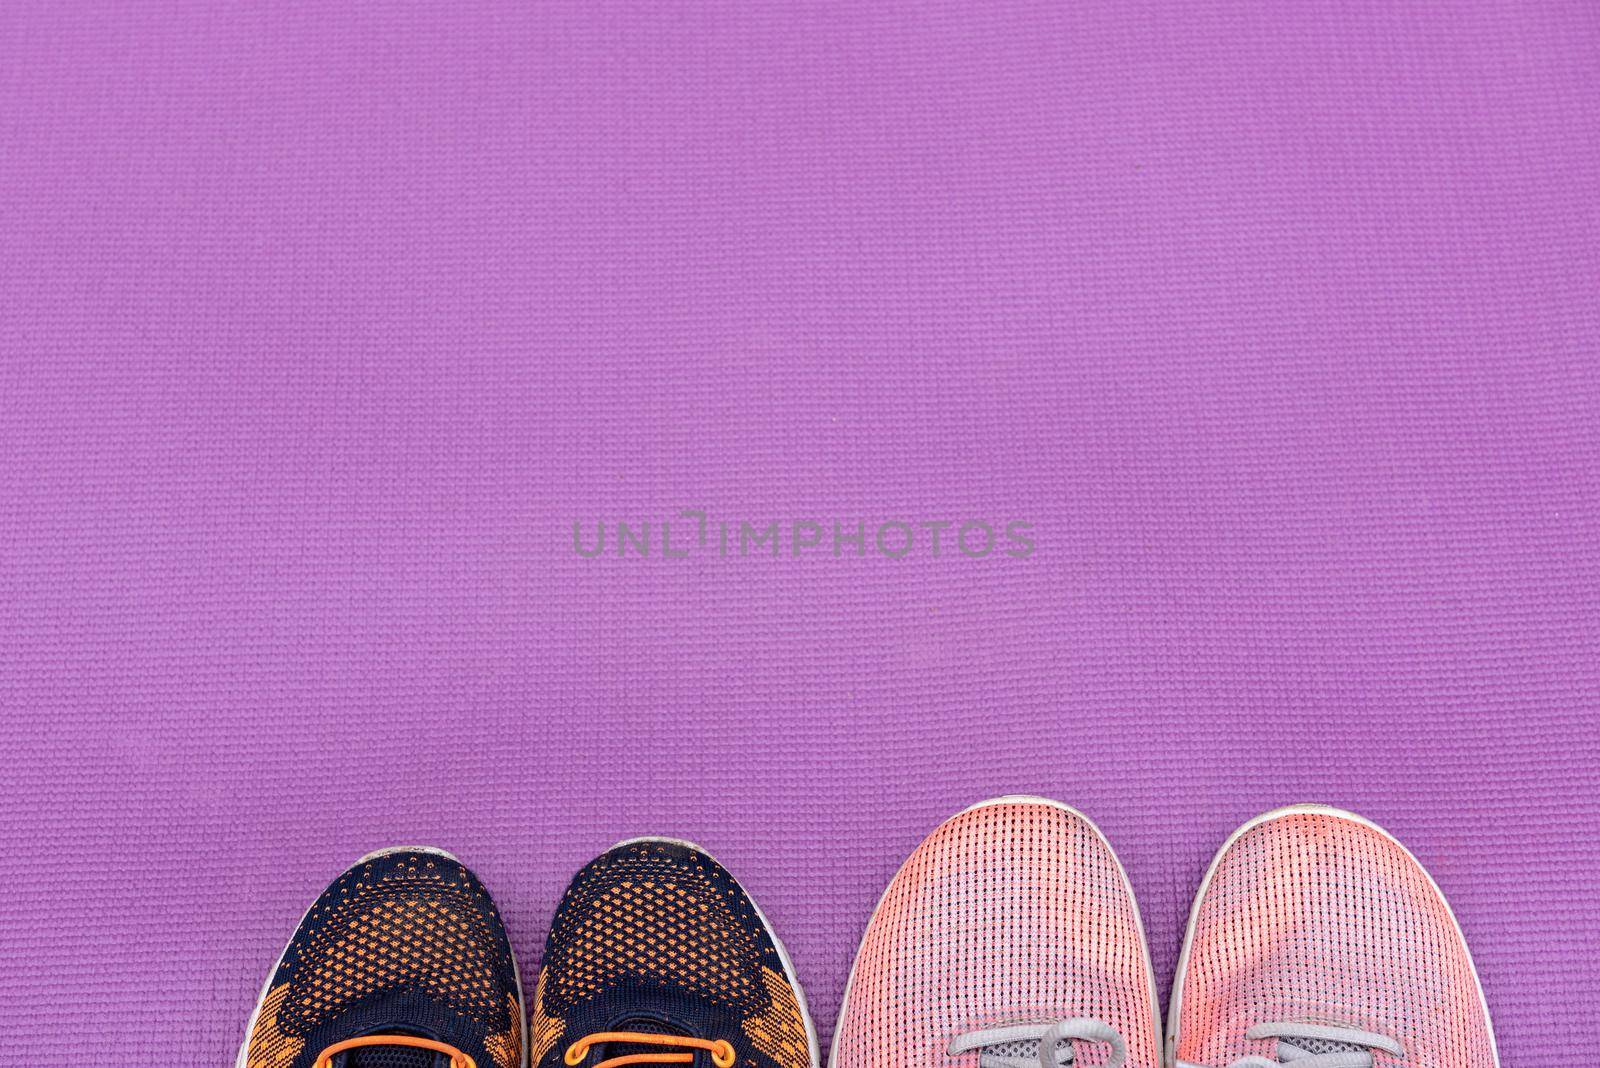 Sneakers and a purple fitness mat. Sport concept by anytka